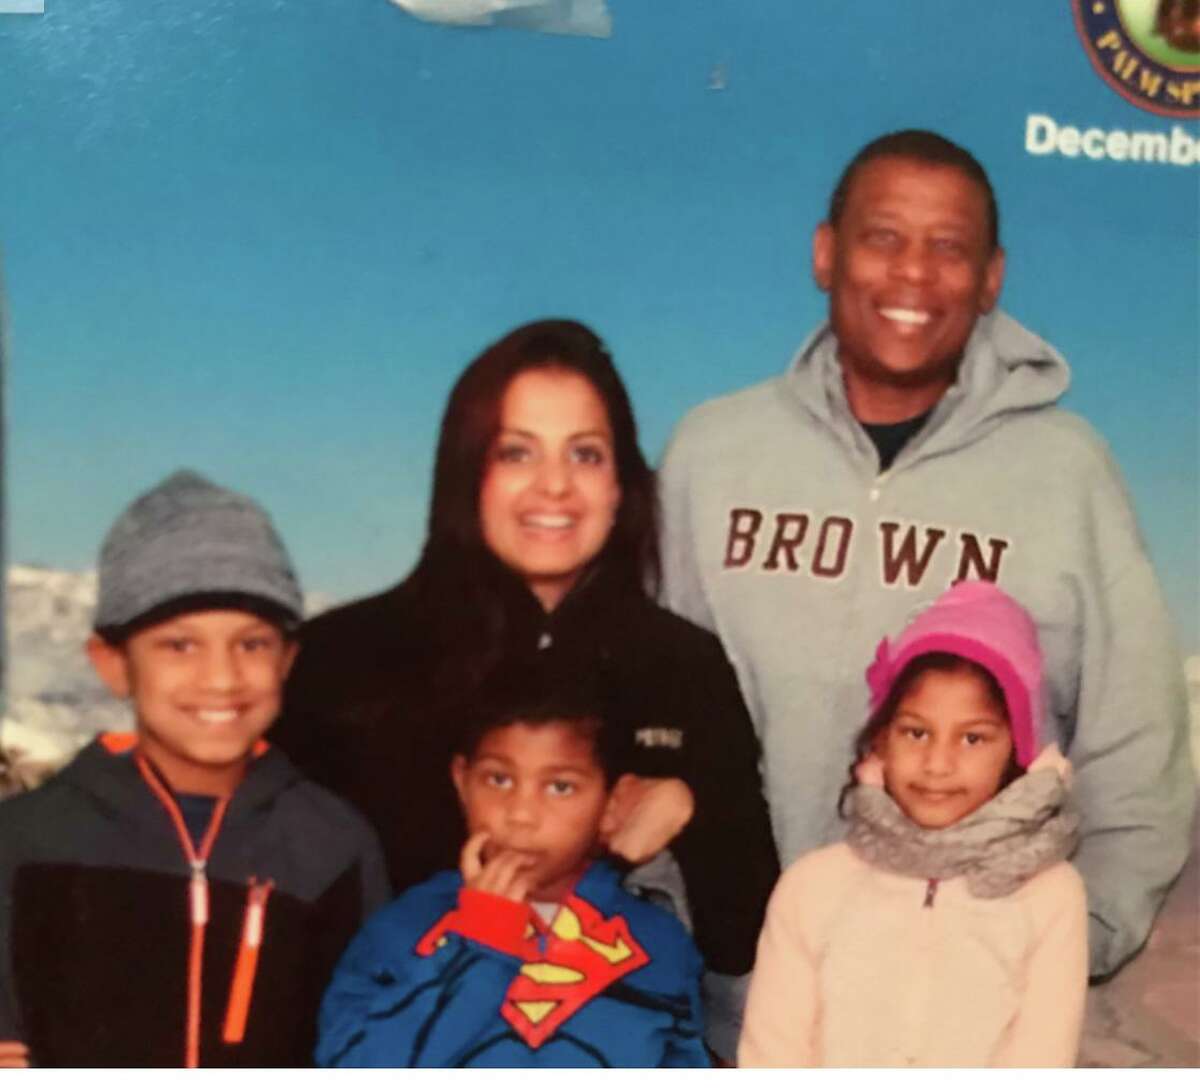 Dr. Gregory Belcher and his wife, Dr. Vilaqsni Ganesh - both now in prison for false billing of insurance companies - and their children, Raymond, David and Rea, are shown in an undated family photo